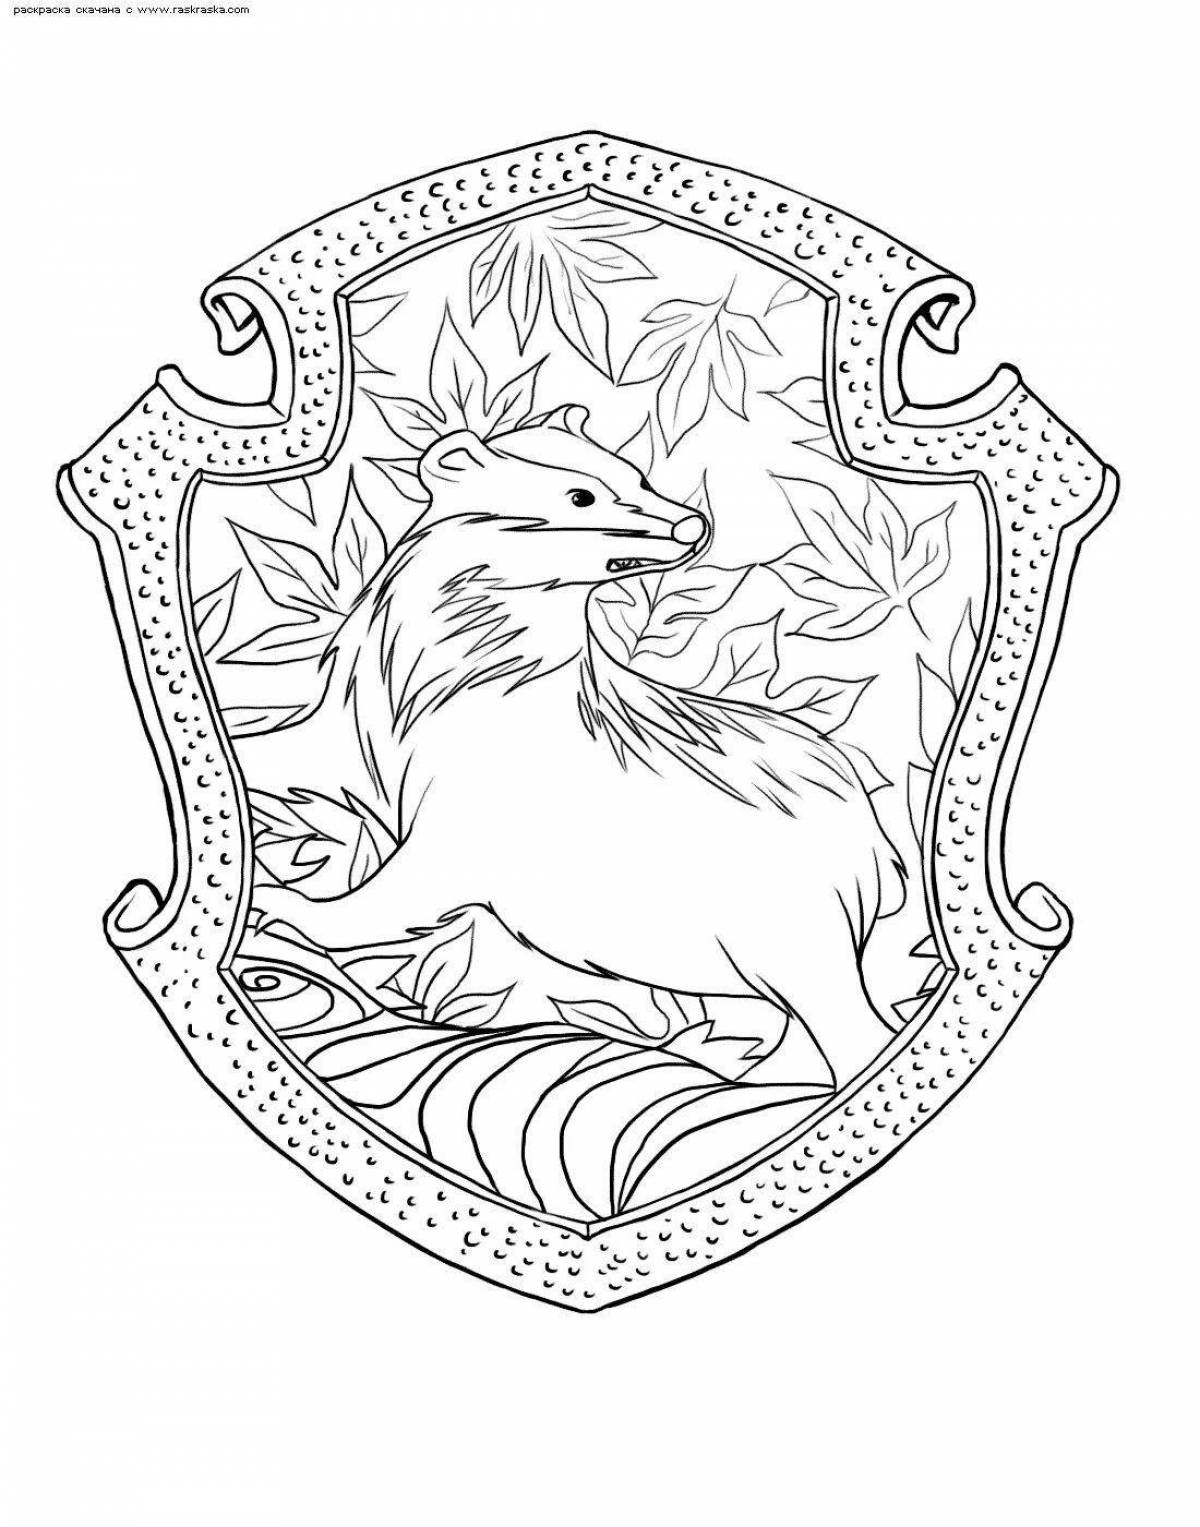 Coloring pages nice houses of hogwarts